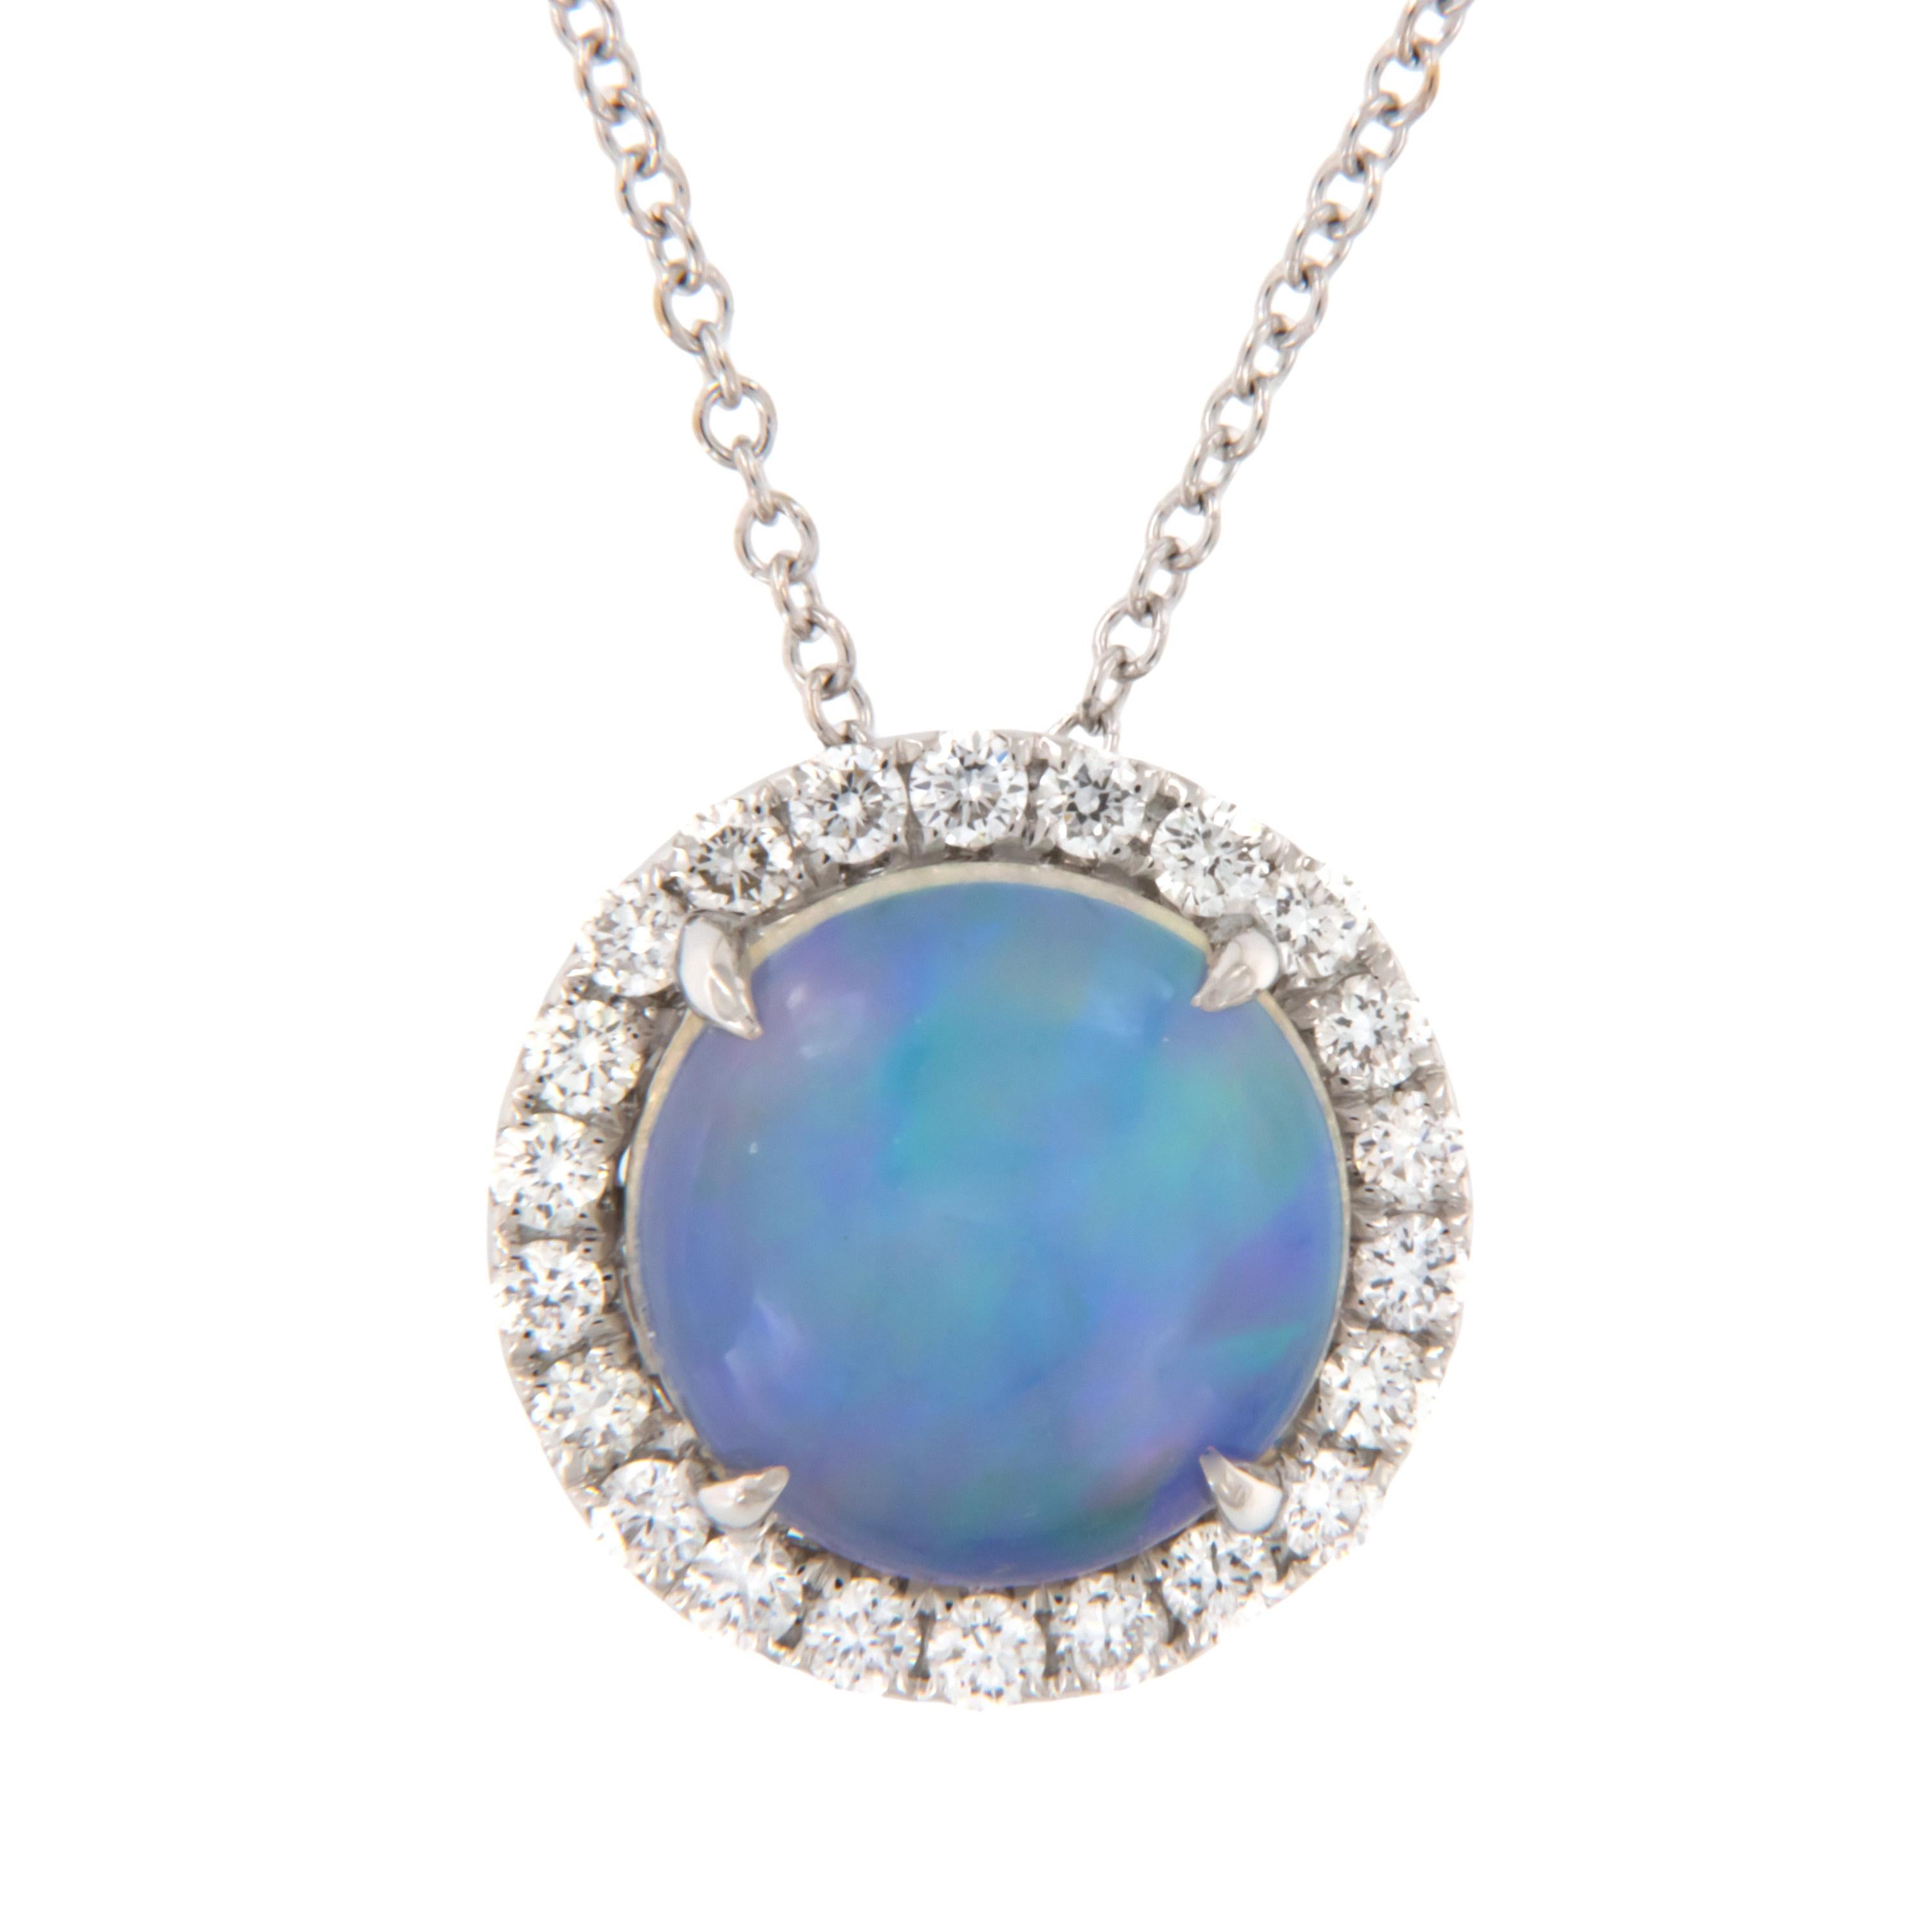 Opals have been compared to volcanoes, galaxies, and fireworks with their never ending combination of colors and patterns. This kaleidoscopic gem encompasses the green of emerald, the yellow of topaz, the blue of sapphire, the purple of amethyst,